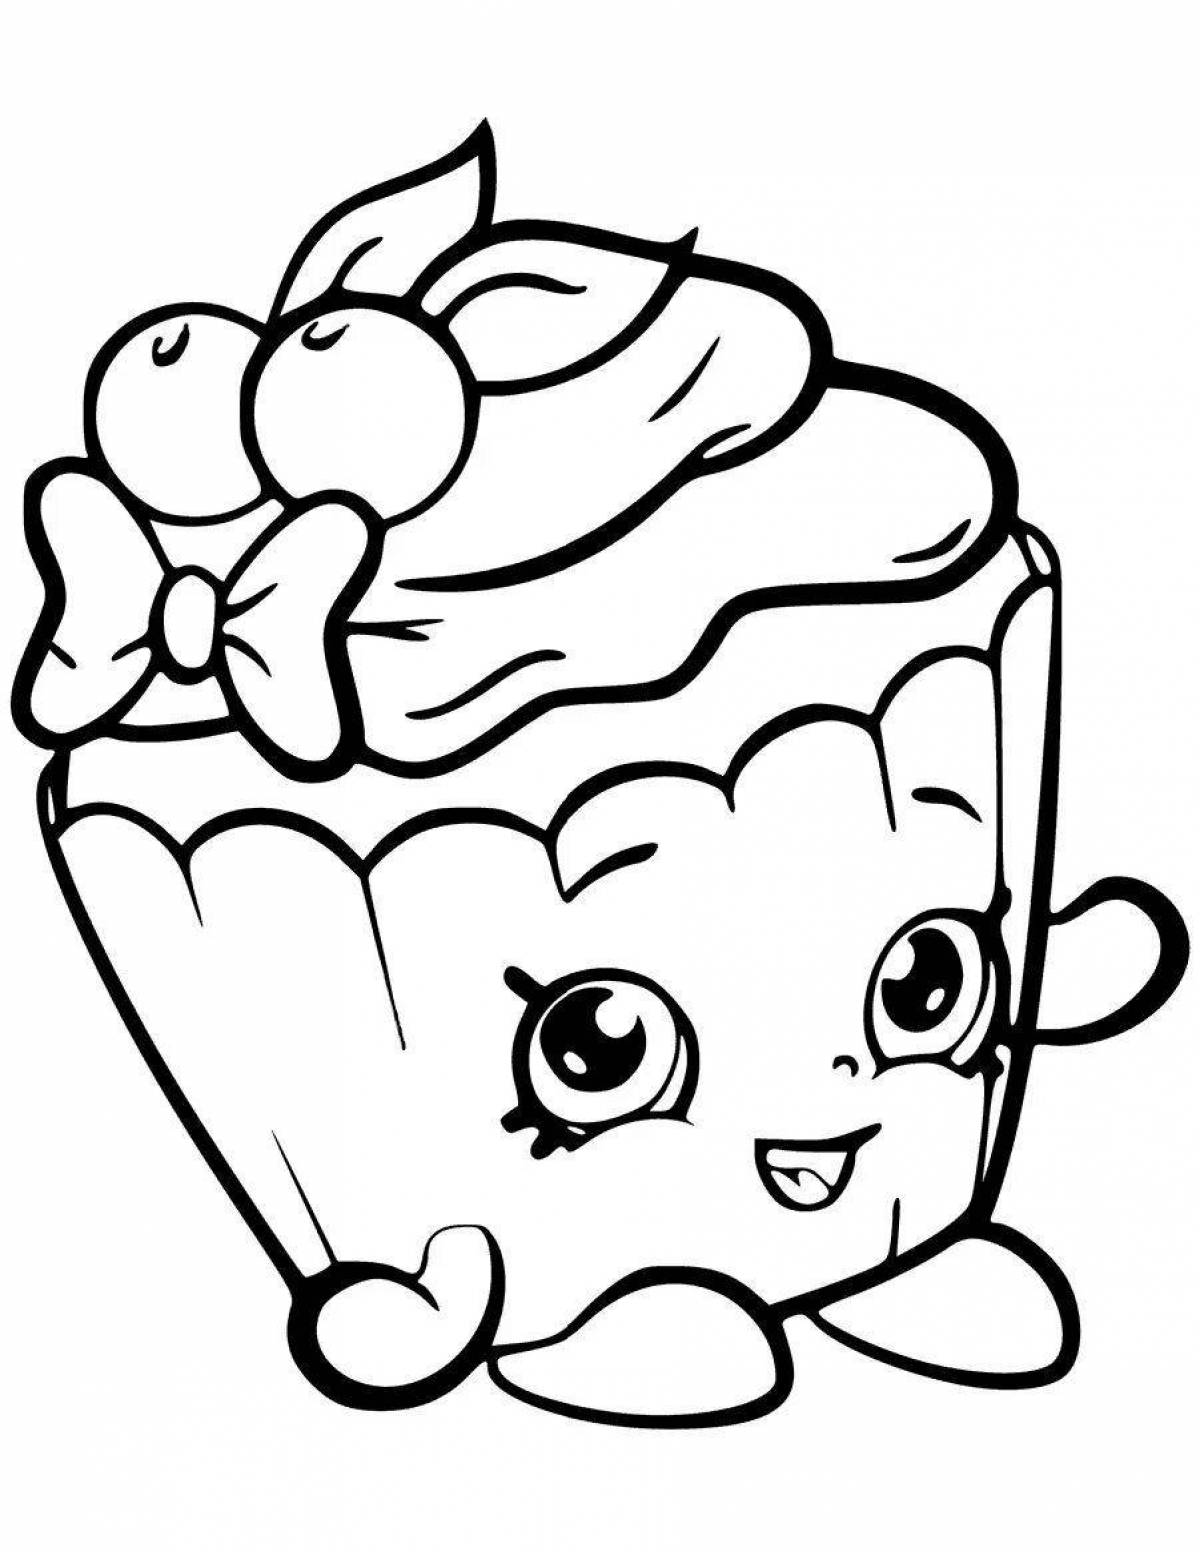 Irresistible soft food coloring page